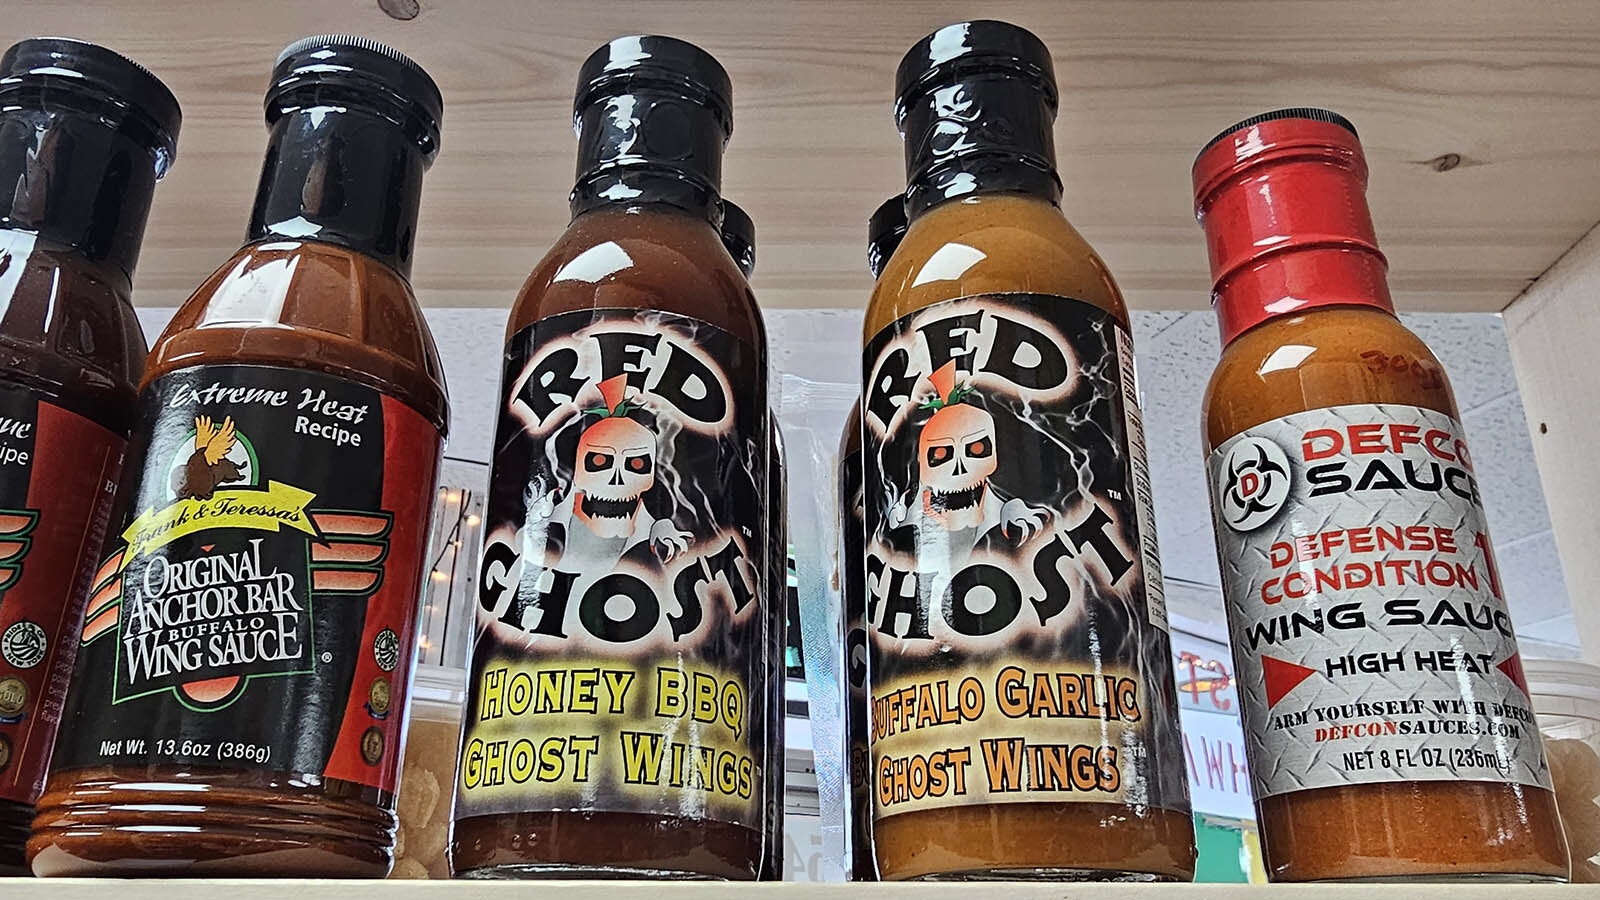 Ghost pepper sauces are popular with chili-heads.